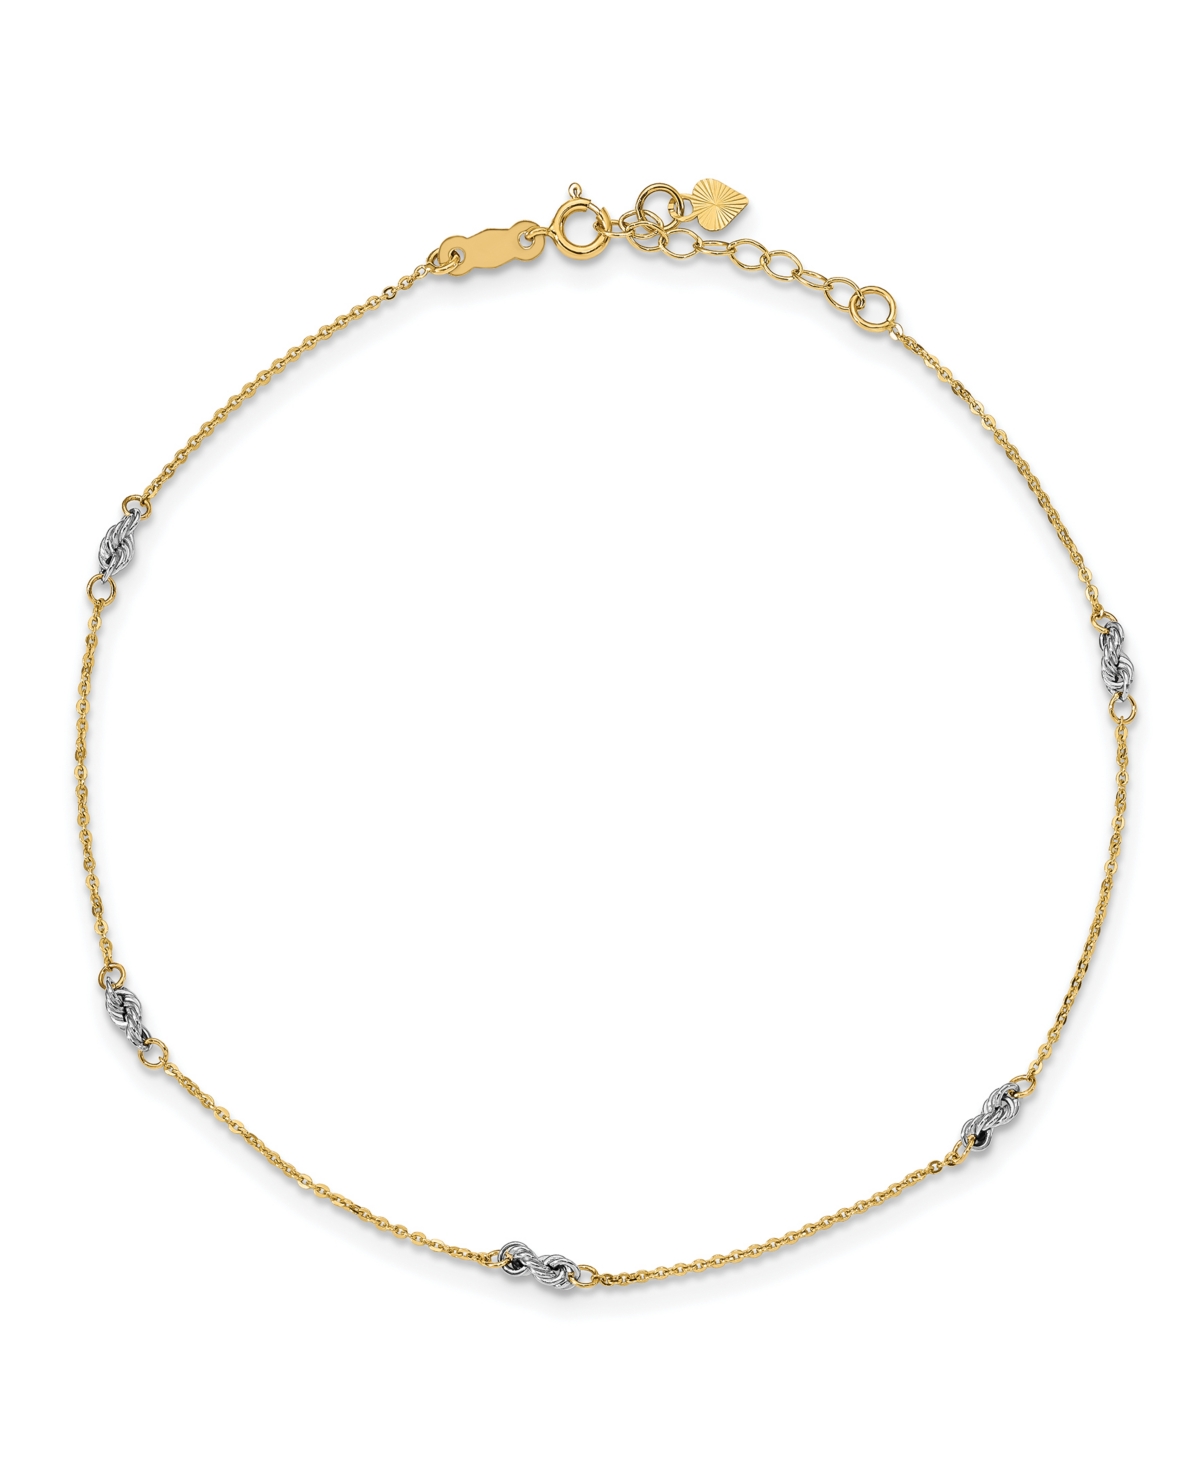 Cable and Rope Chain Anklet in 14k Yellow and White Gold - Tt Gold